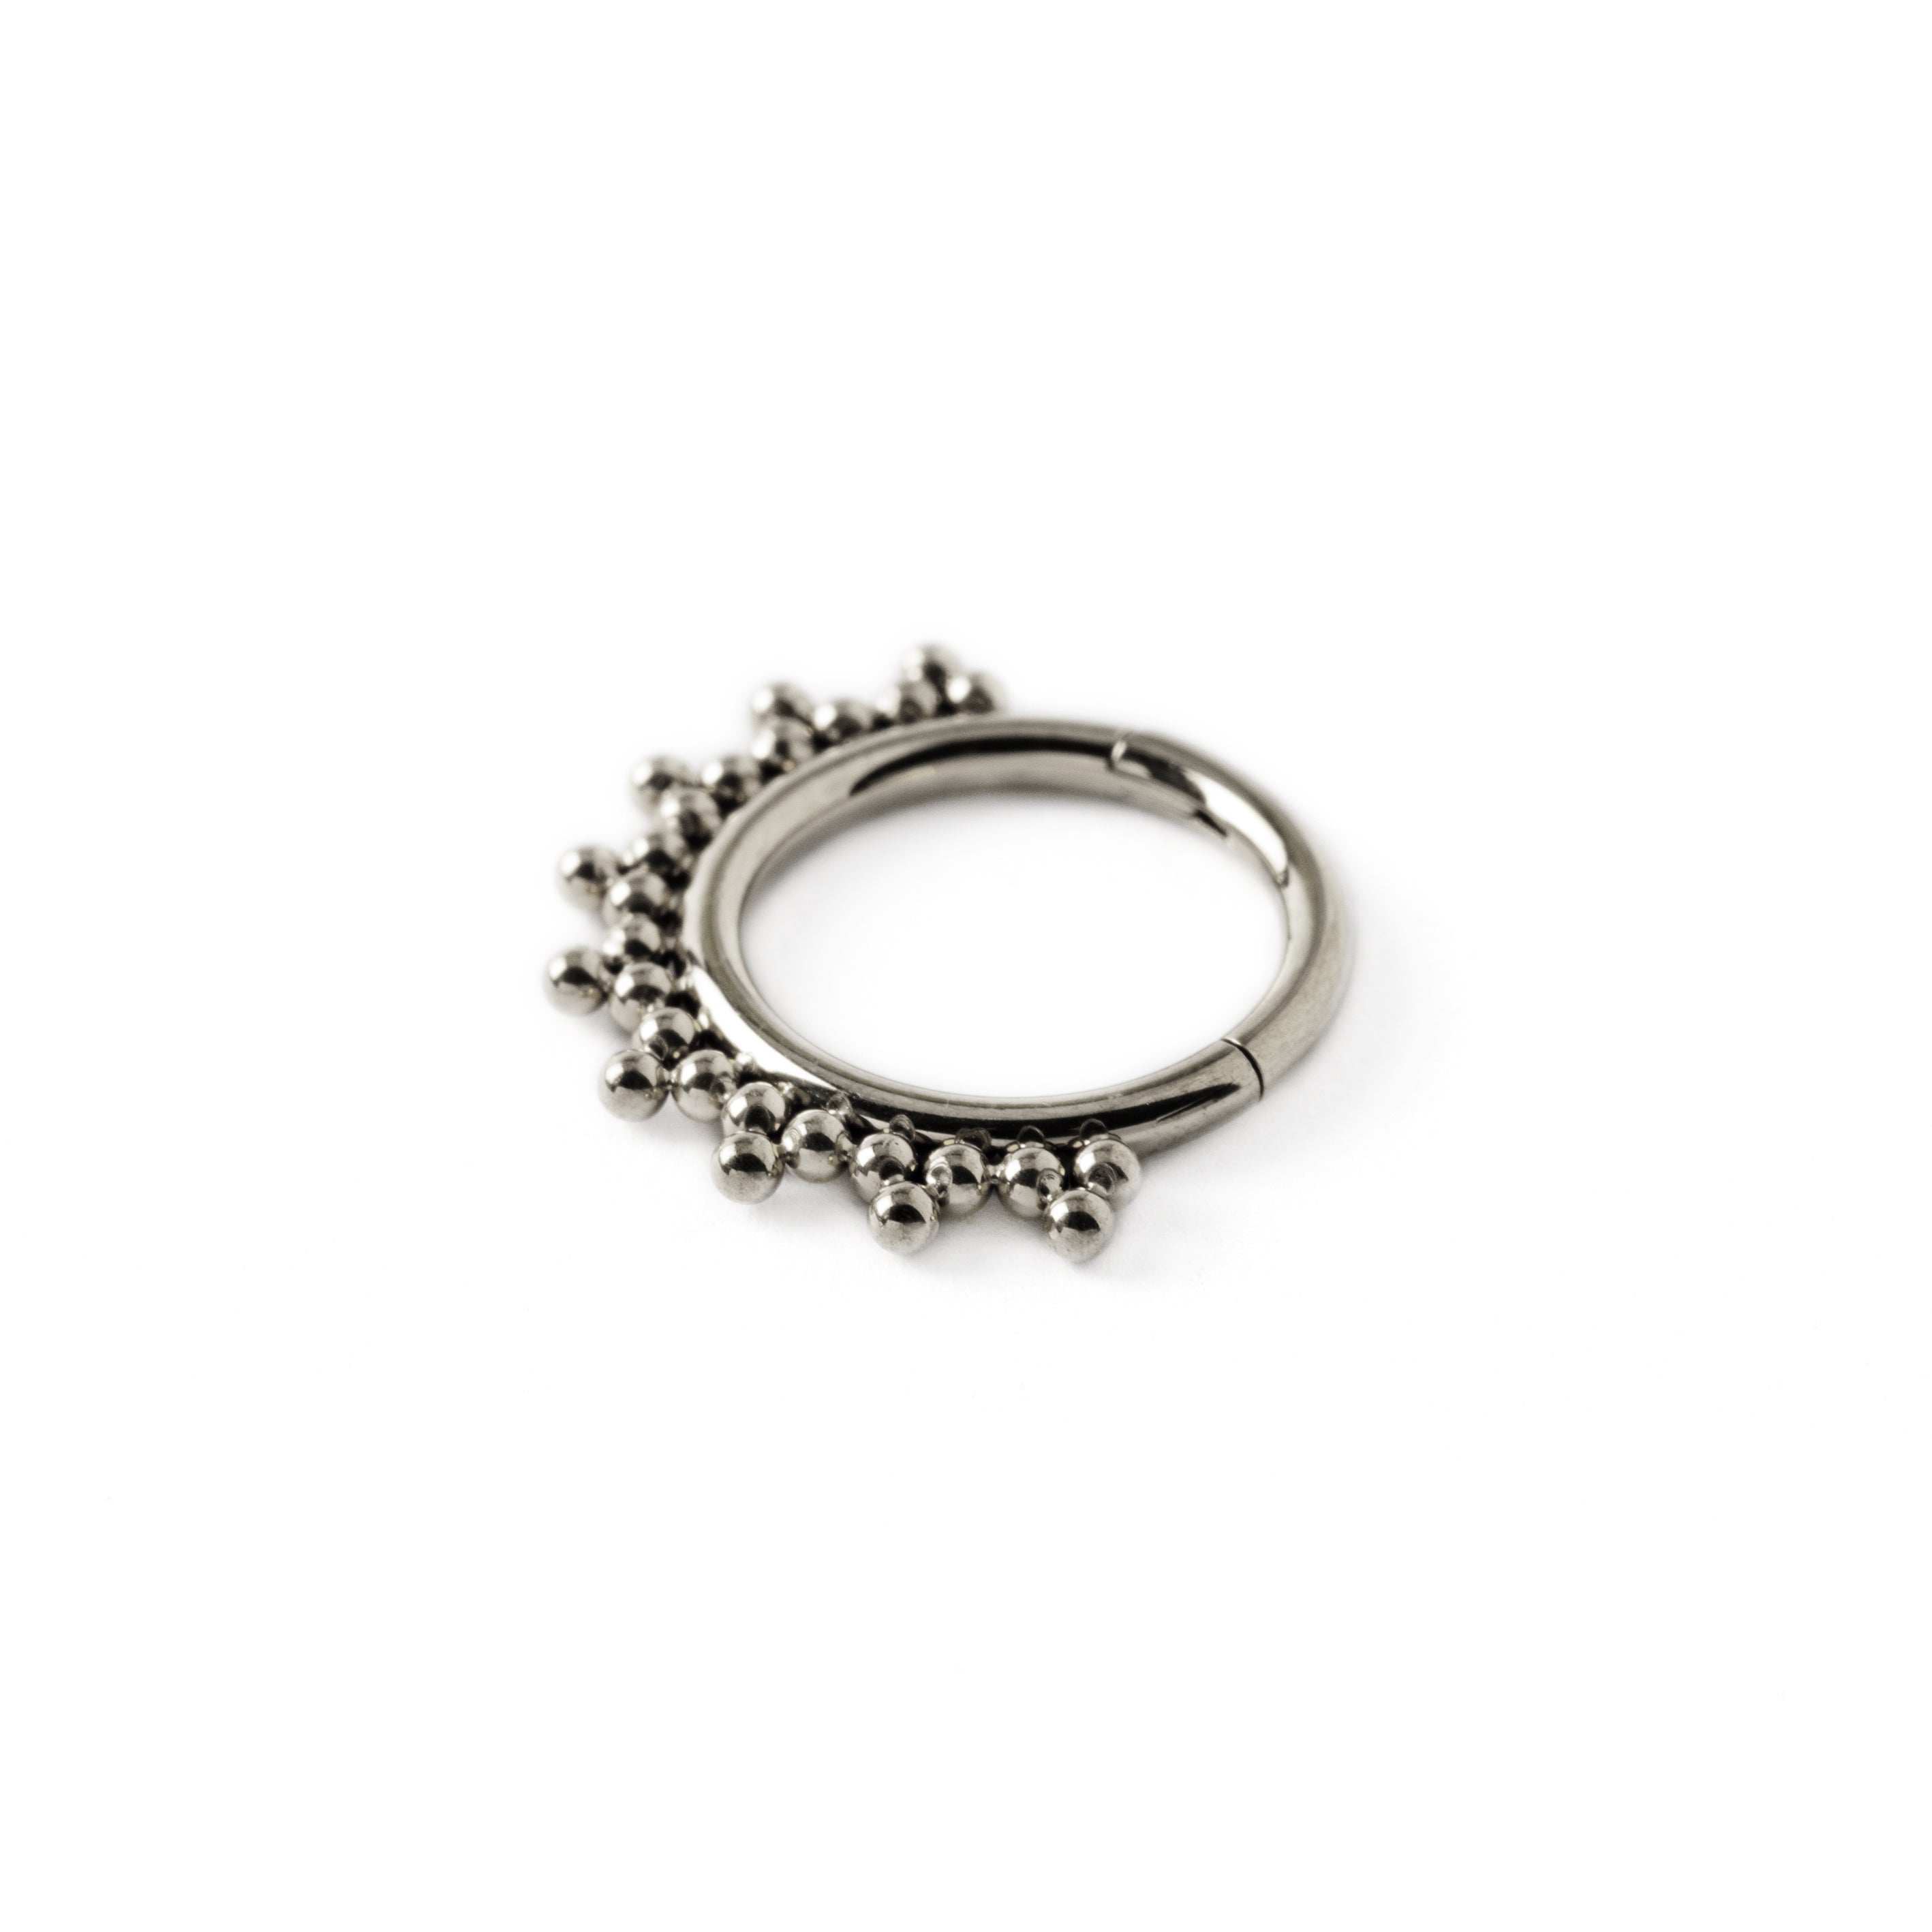 Sarika surgical steel septum clicker side view